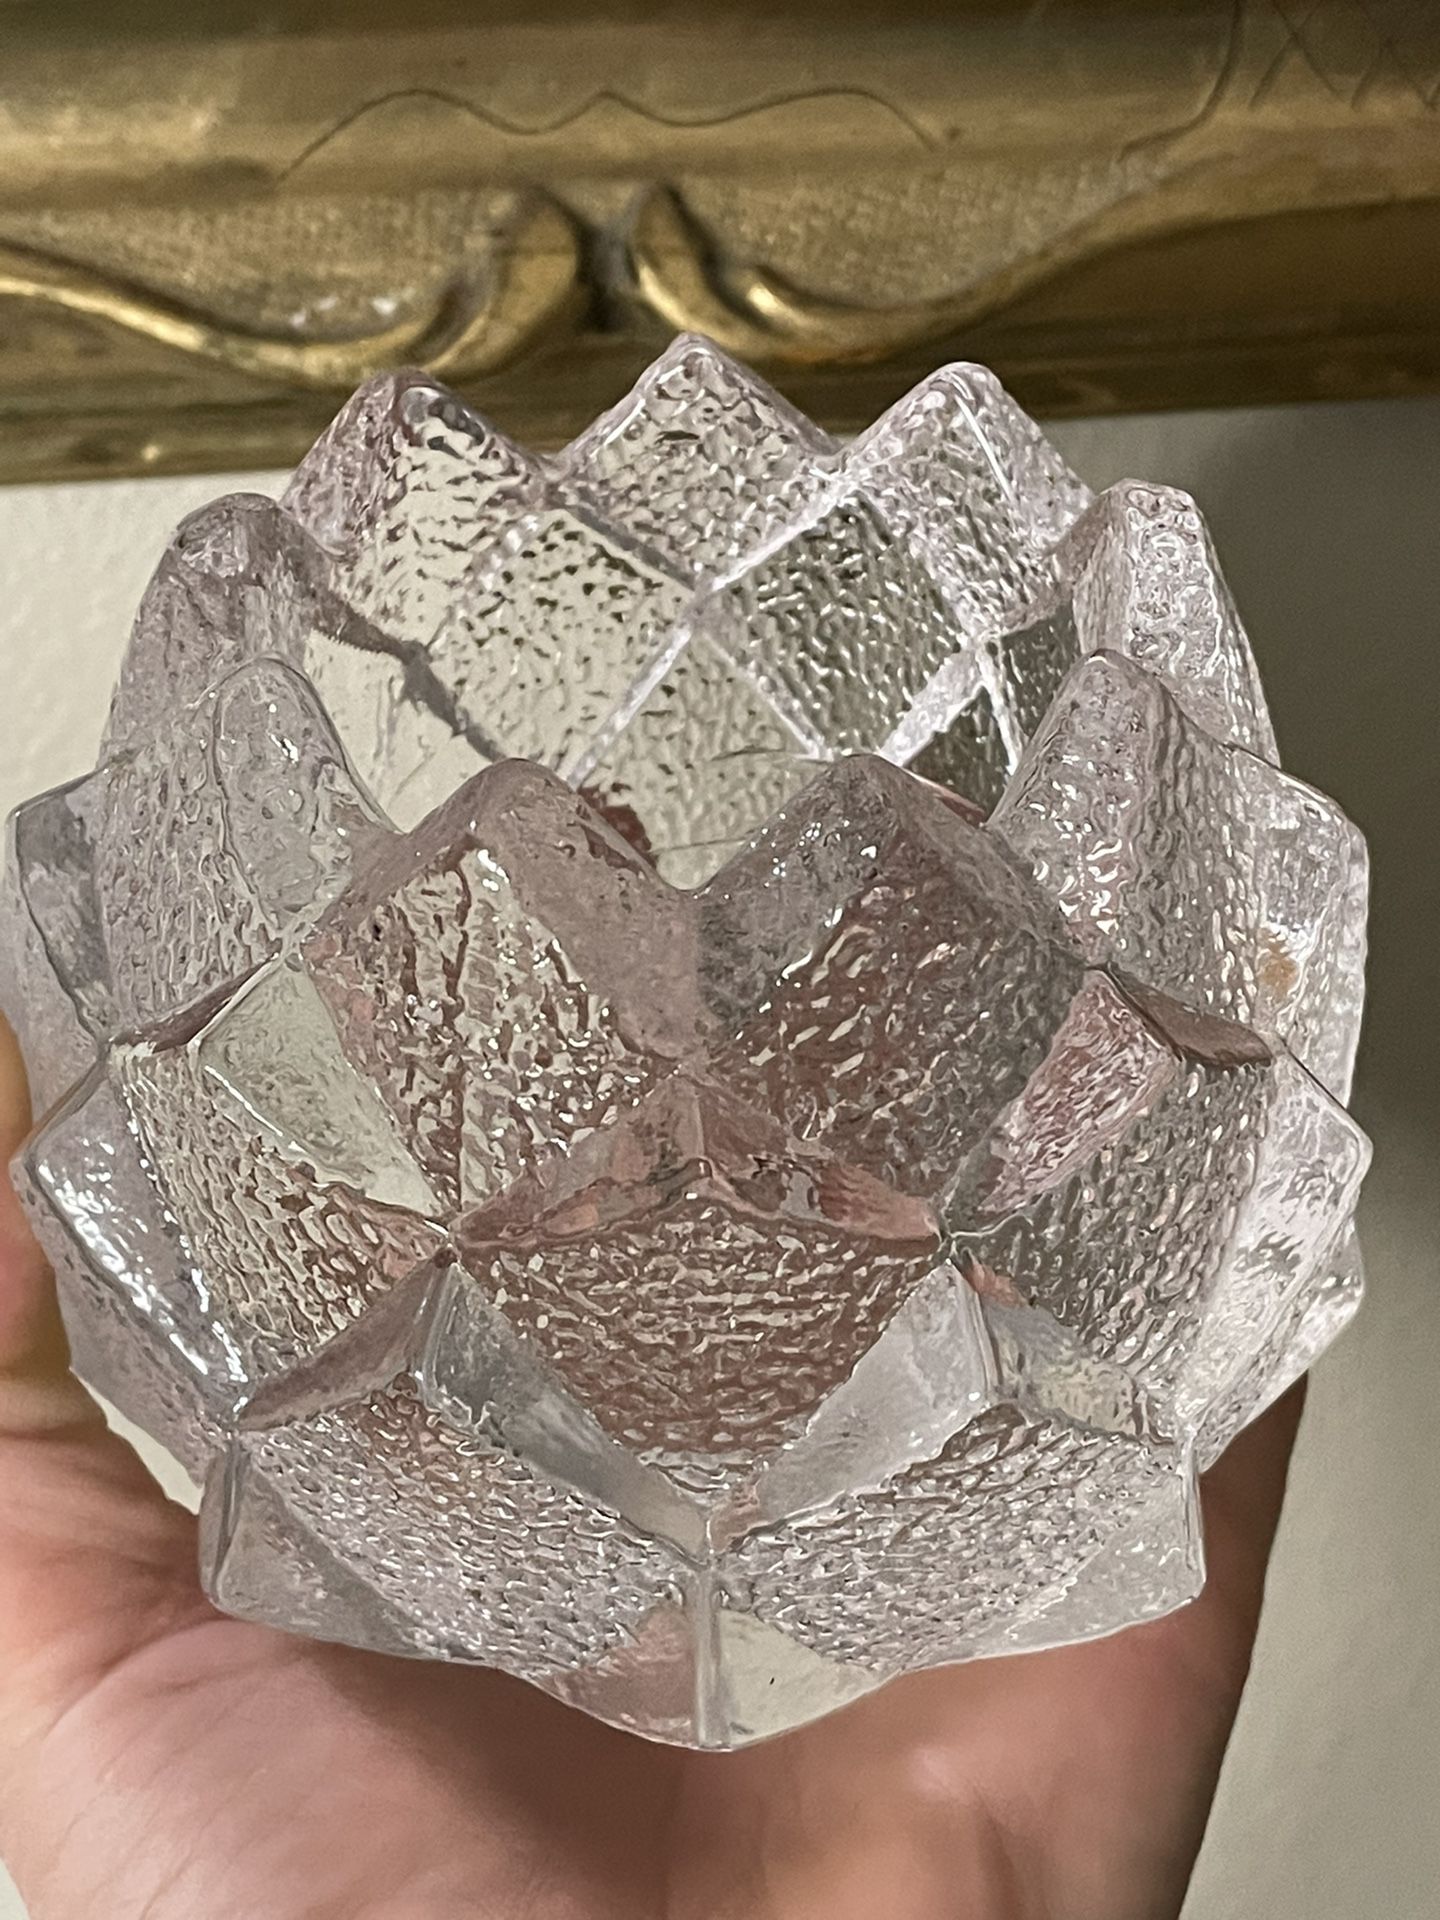 Orrefors Artichoke Crystal  Candle  Holder / Crystal  Firefly Nimbus 3 1/2” base , weights  a little  under 2 lbs.